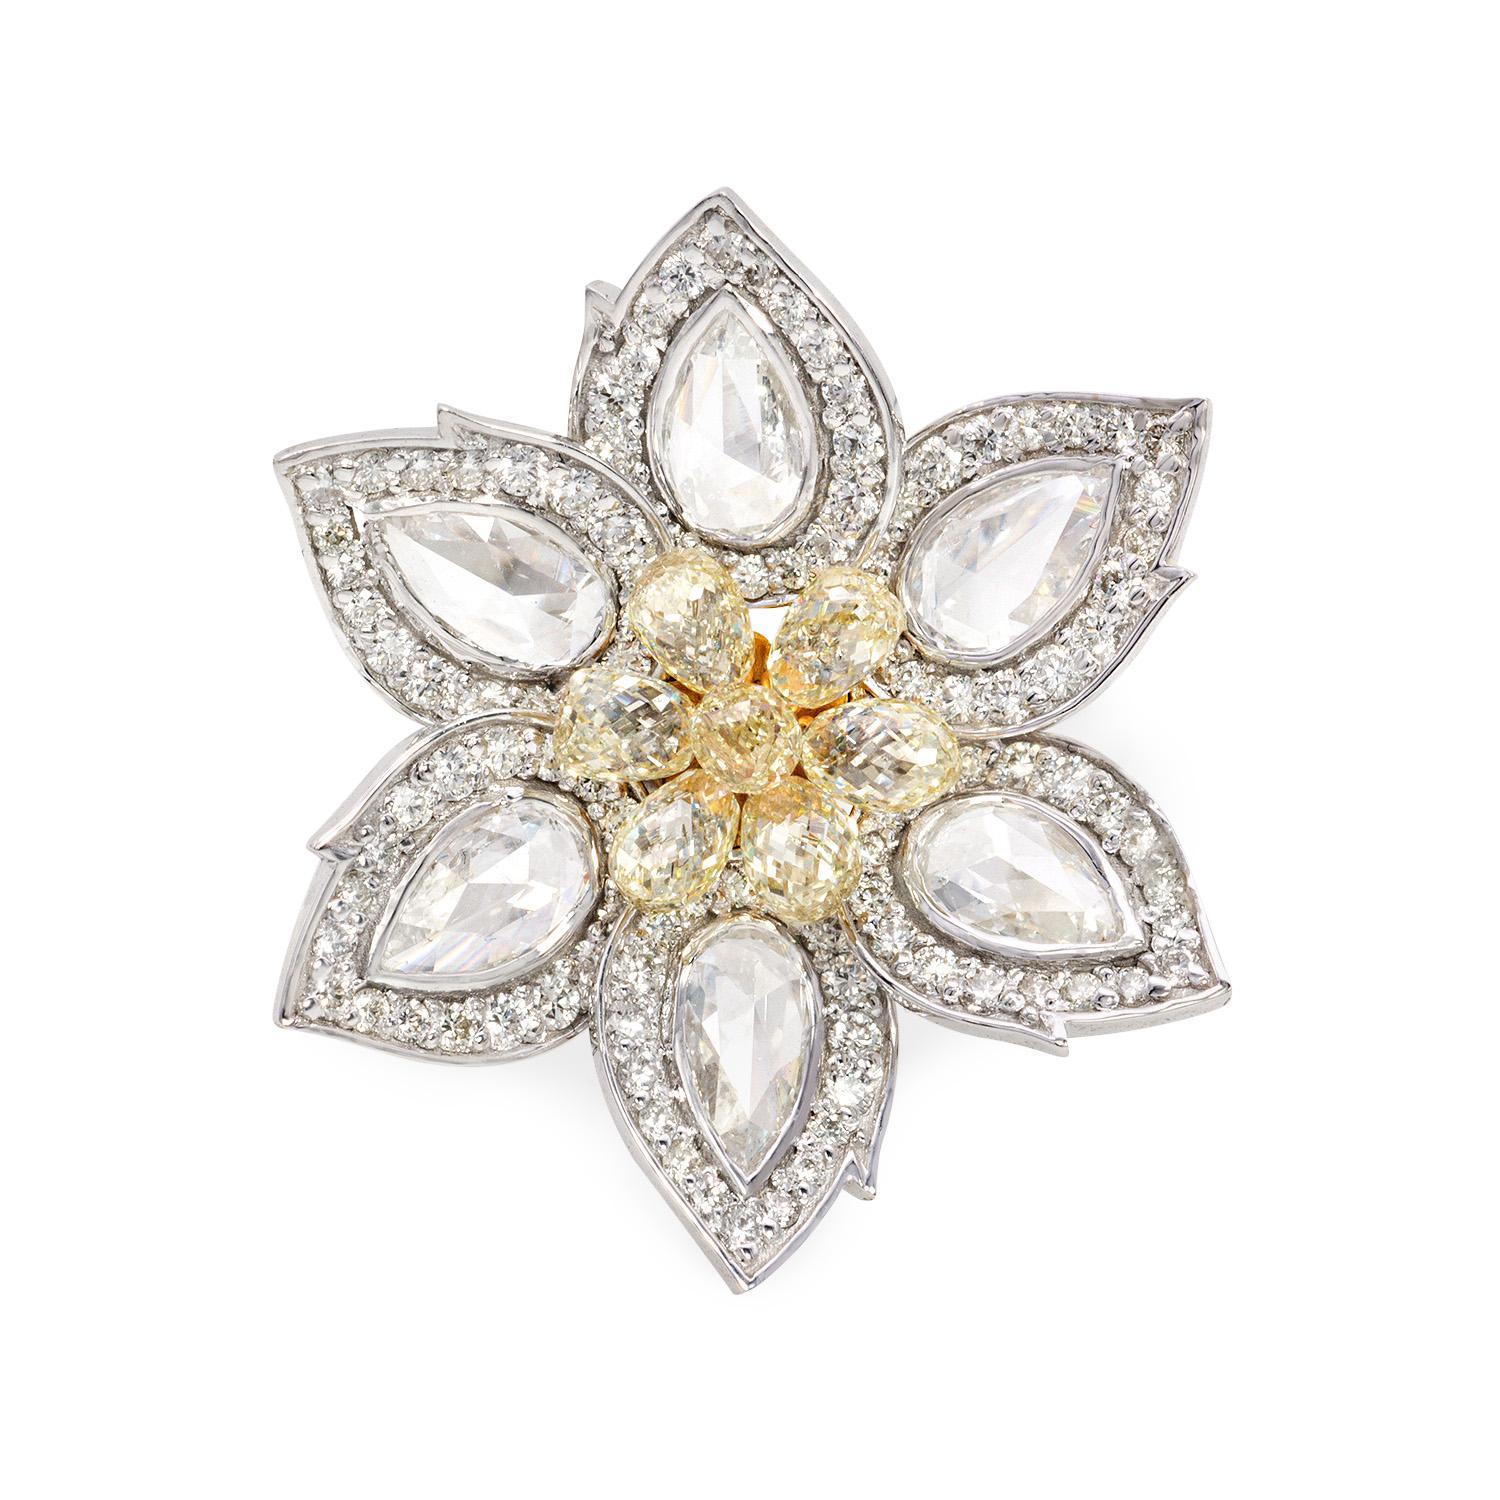 The Daisy is a stunning and captivating diamond ring that exudes elegance and timeless beauty. It features a breathtaking Diamond Briolette weighing 1.92 carats, which takes center stage and captures the light with its dazzling brilliance. This